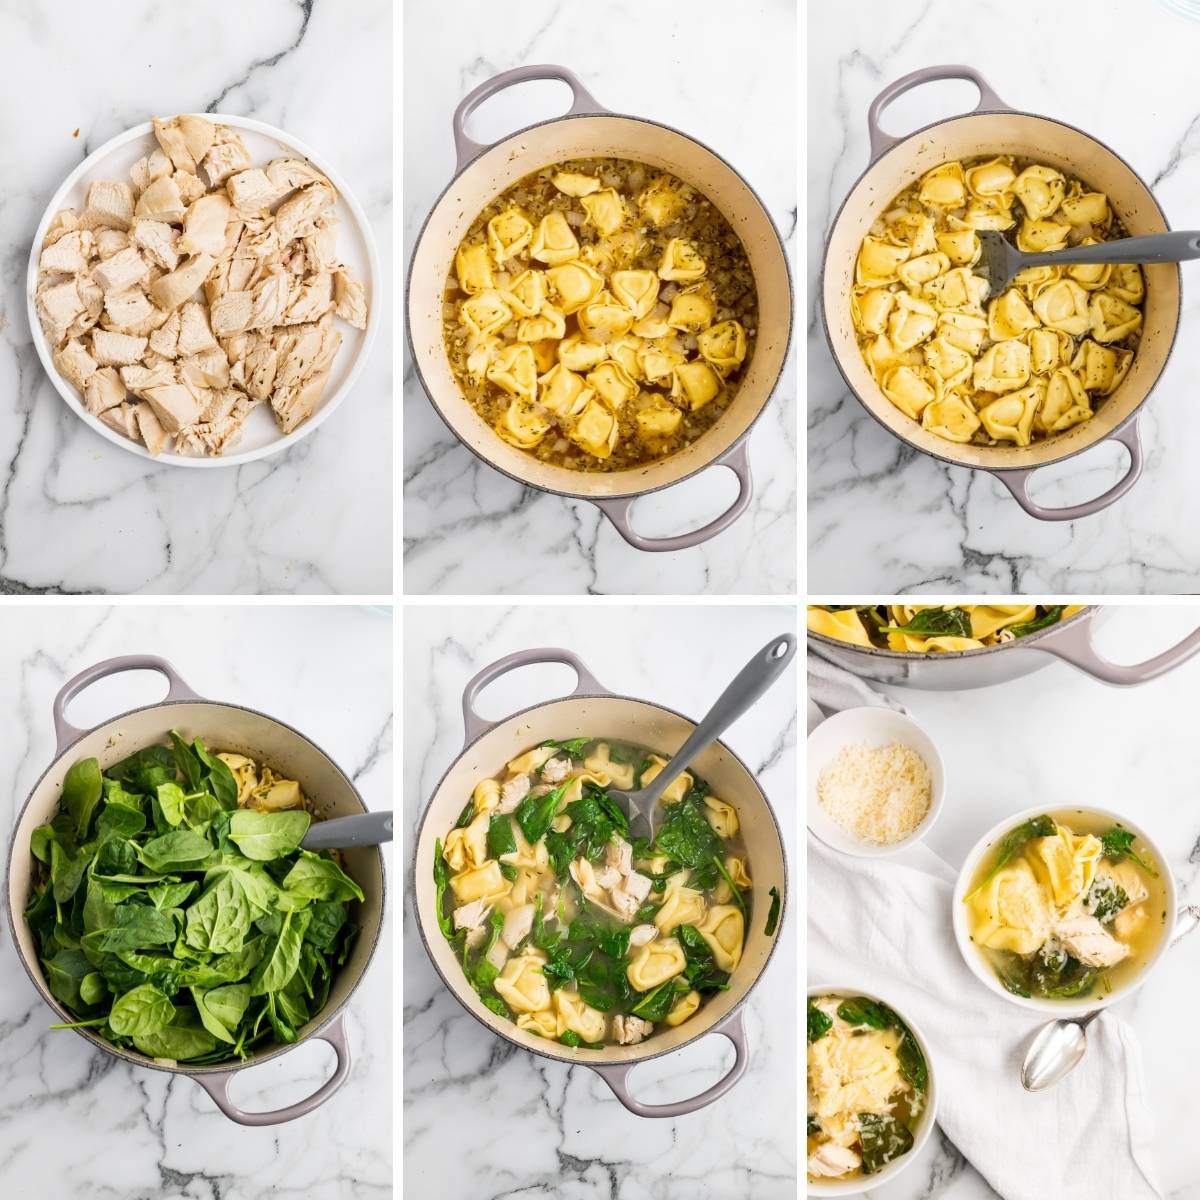 another step by step collage showing how to make chicken tortellini soup